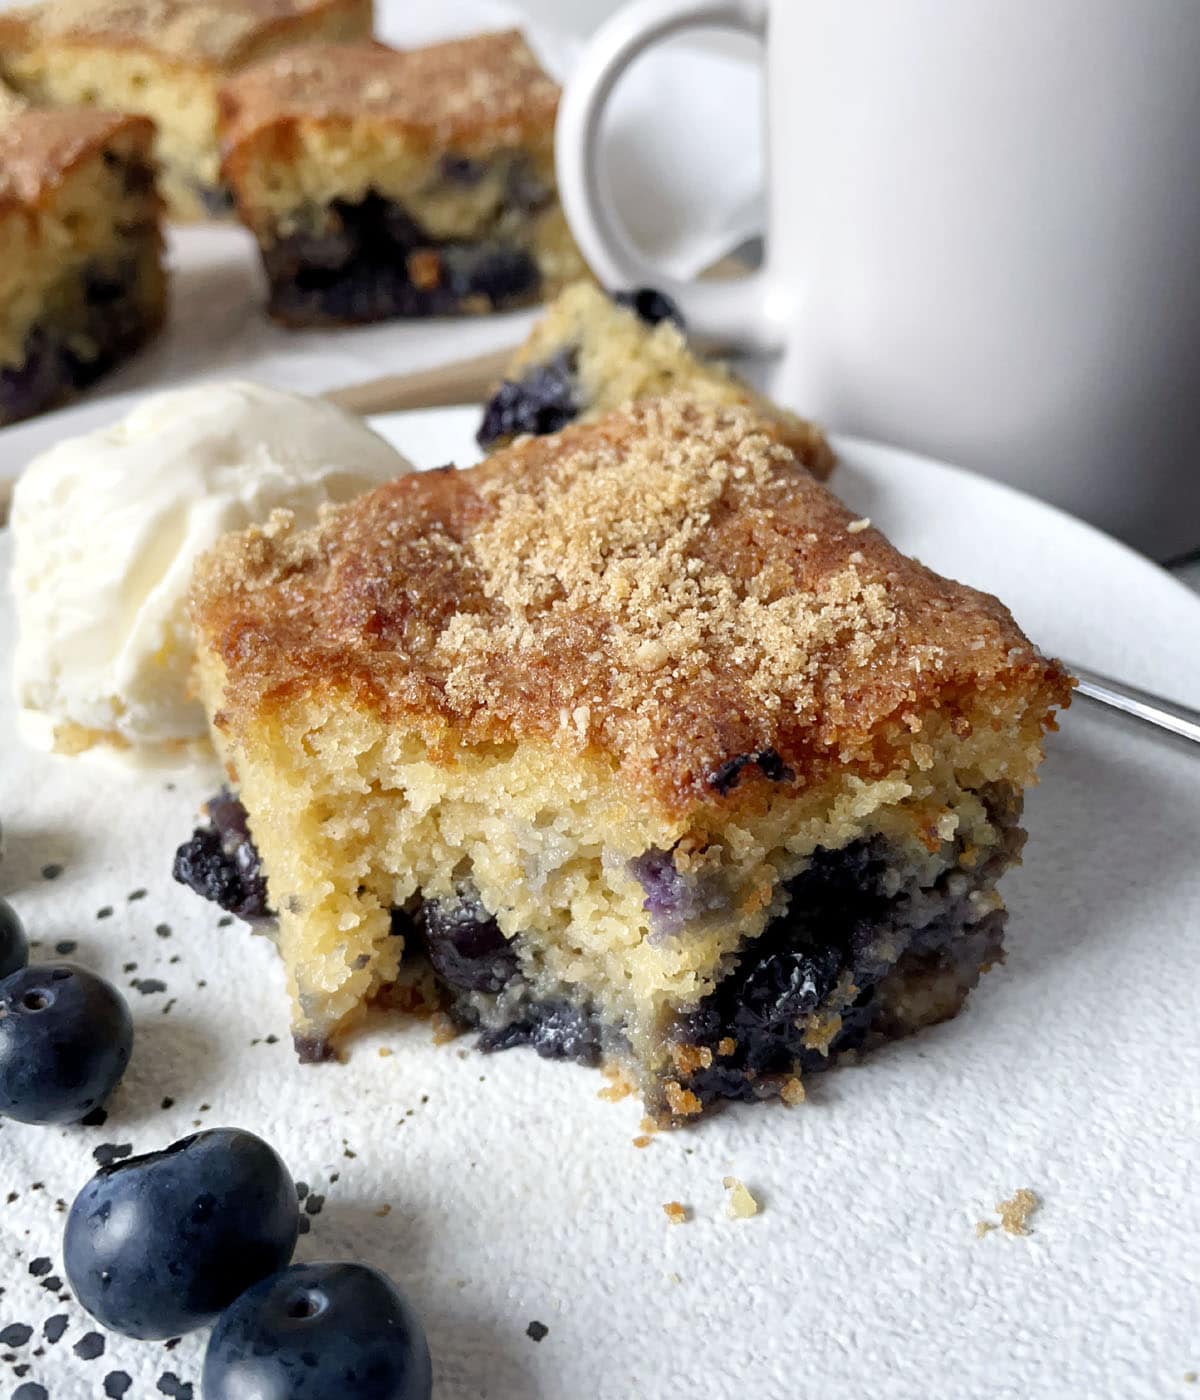 A piece of blueberry coffee cake on a white plate with a scoop of ice cream and fresh blueberries.